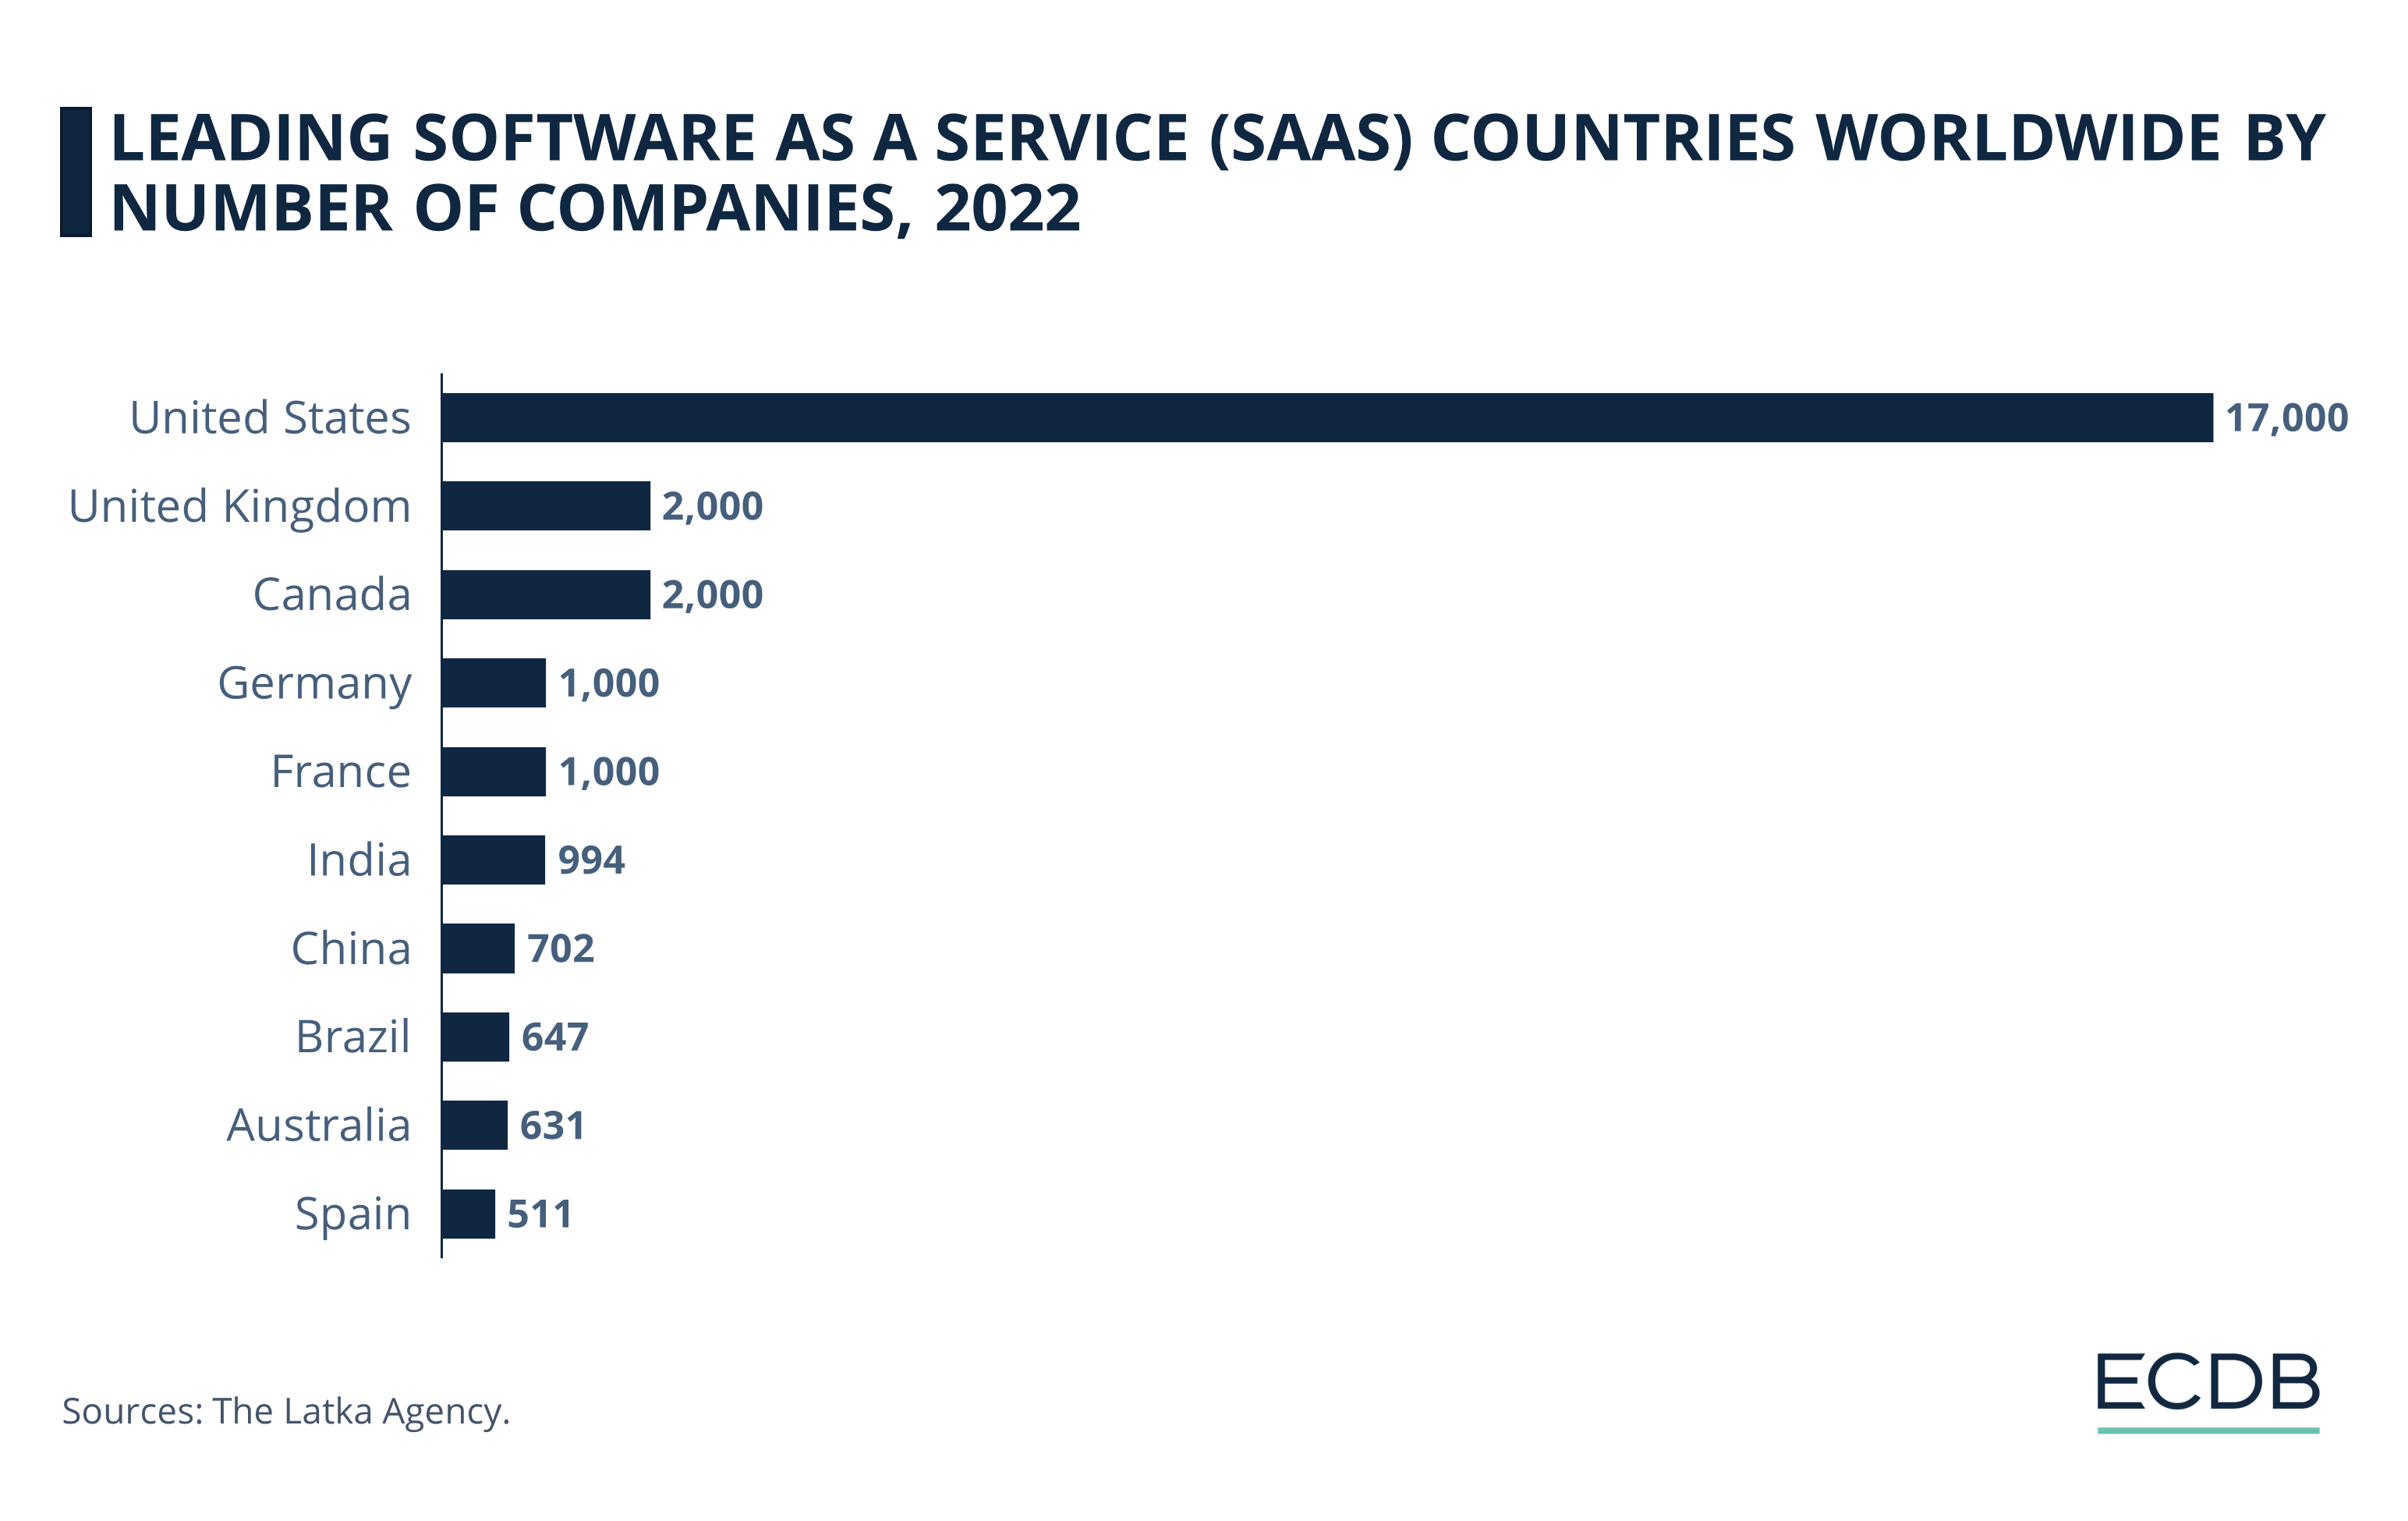 Leading Software as a Service (SaaS) Countries Worldwide by Number of Companies, 2022